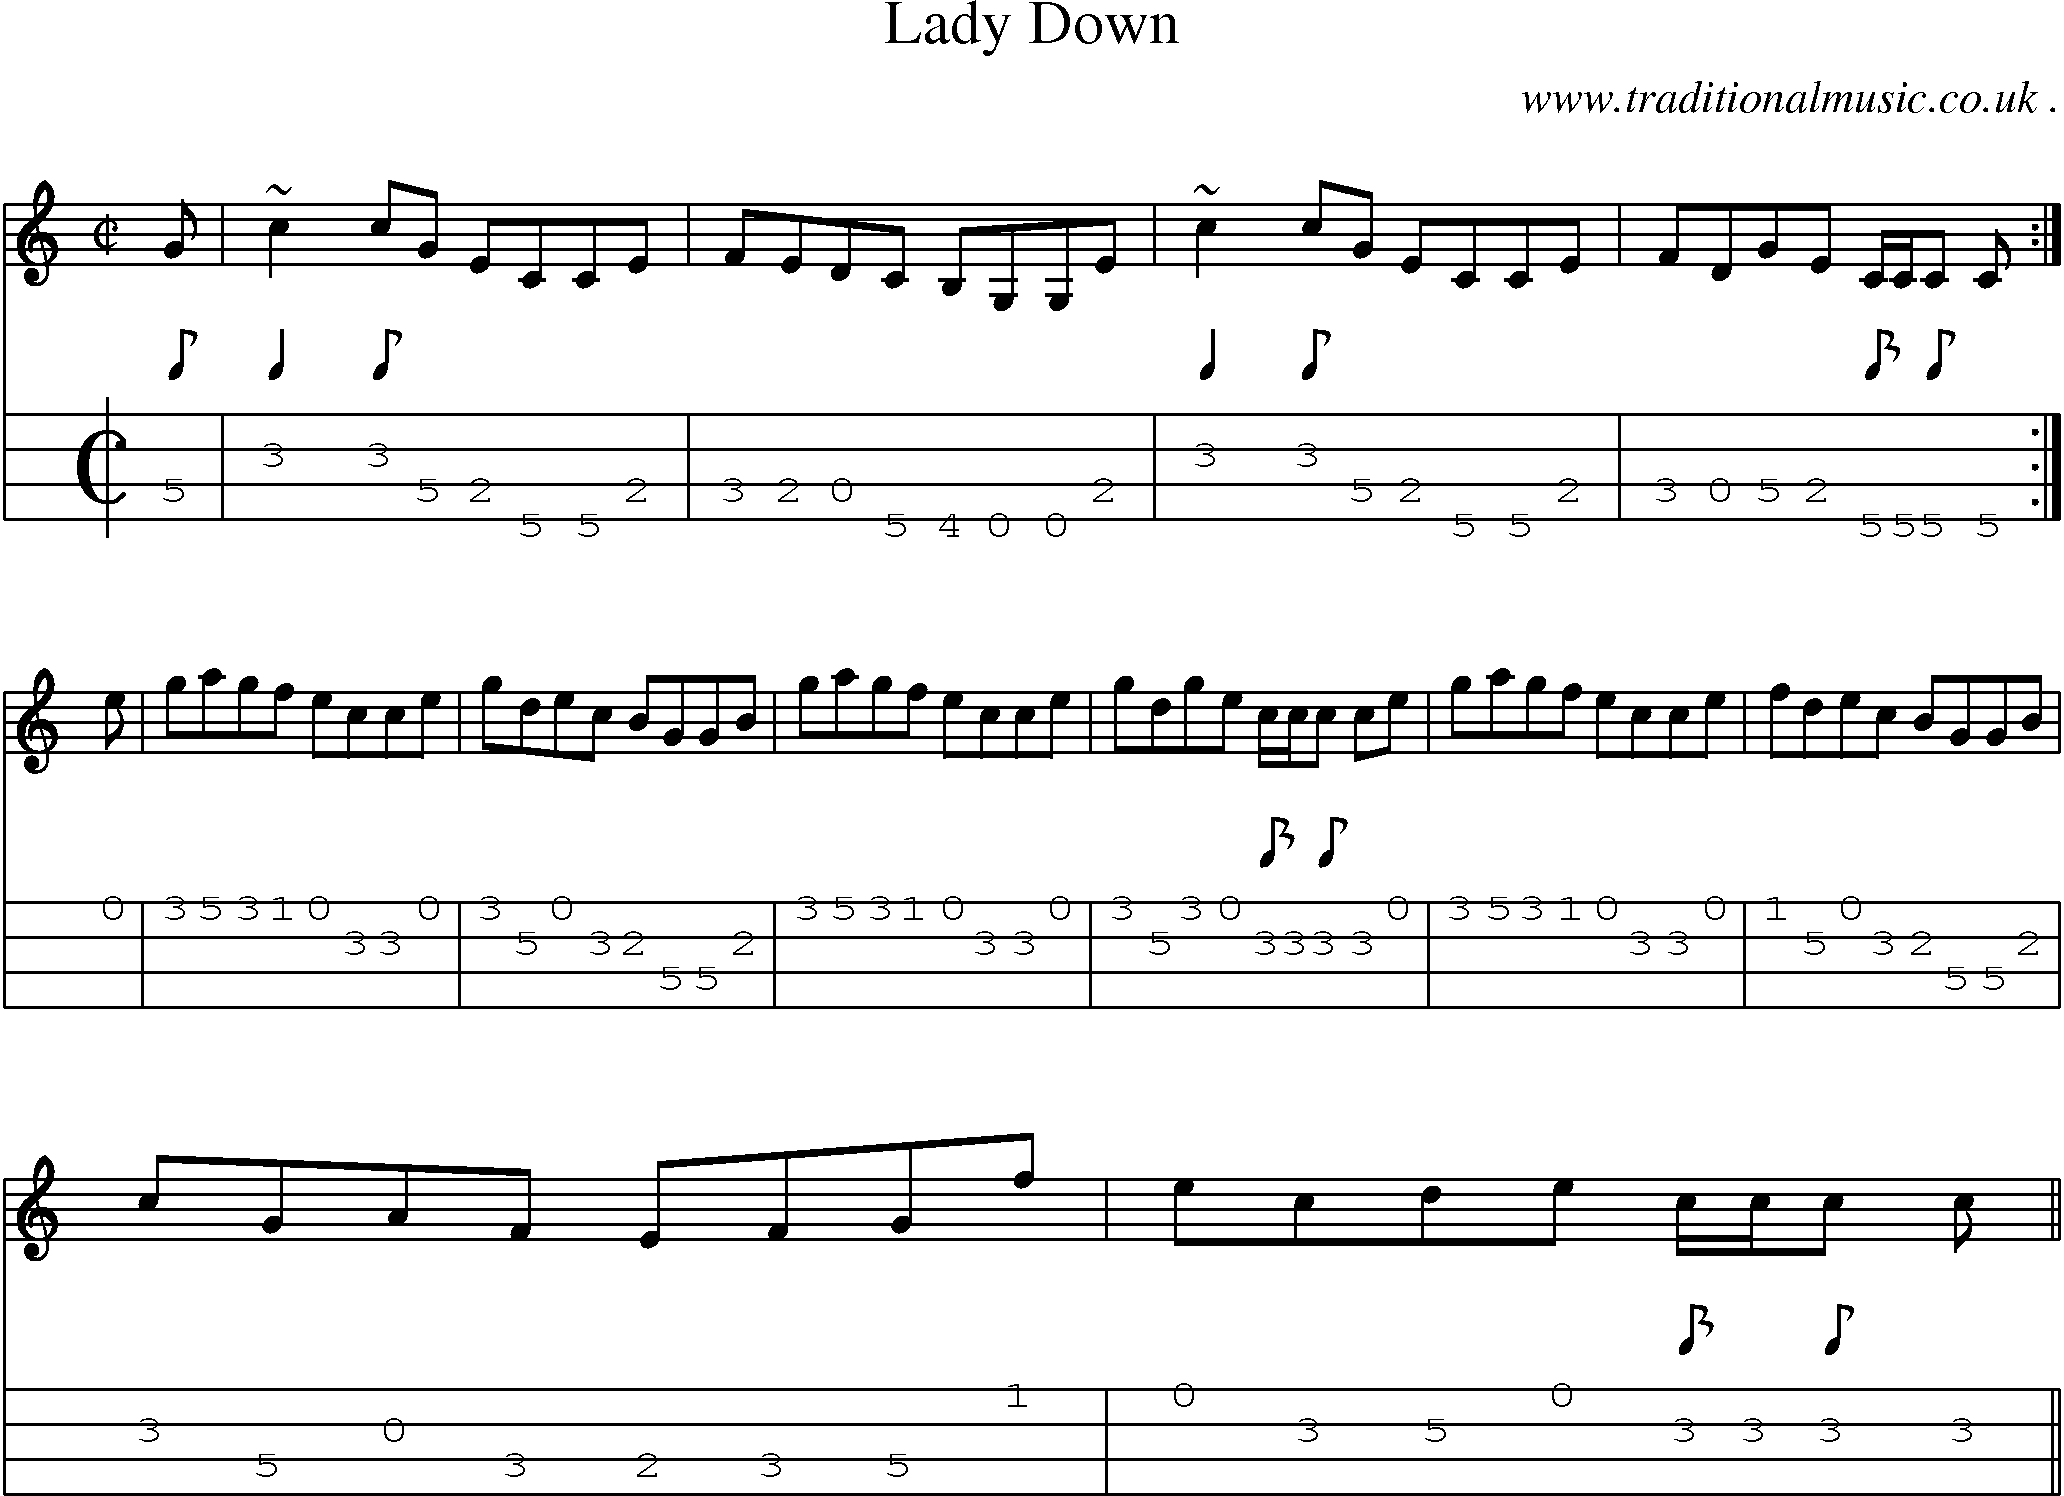 Sheet-music  score, Chords and Mandolin Tabs for Lady Down